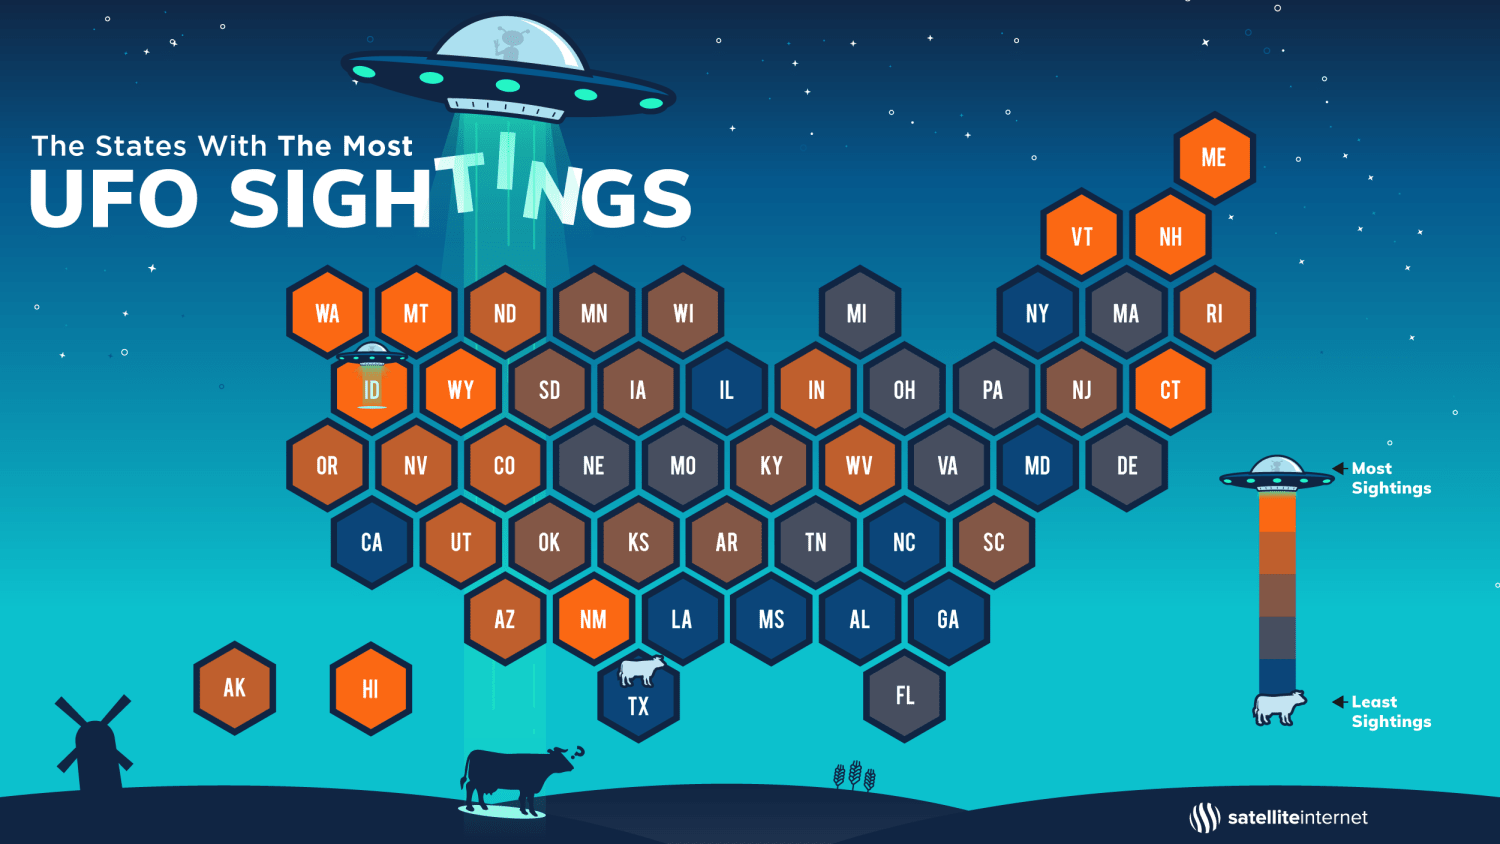 A map depiction of US states that have the most UFO sightings.